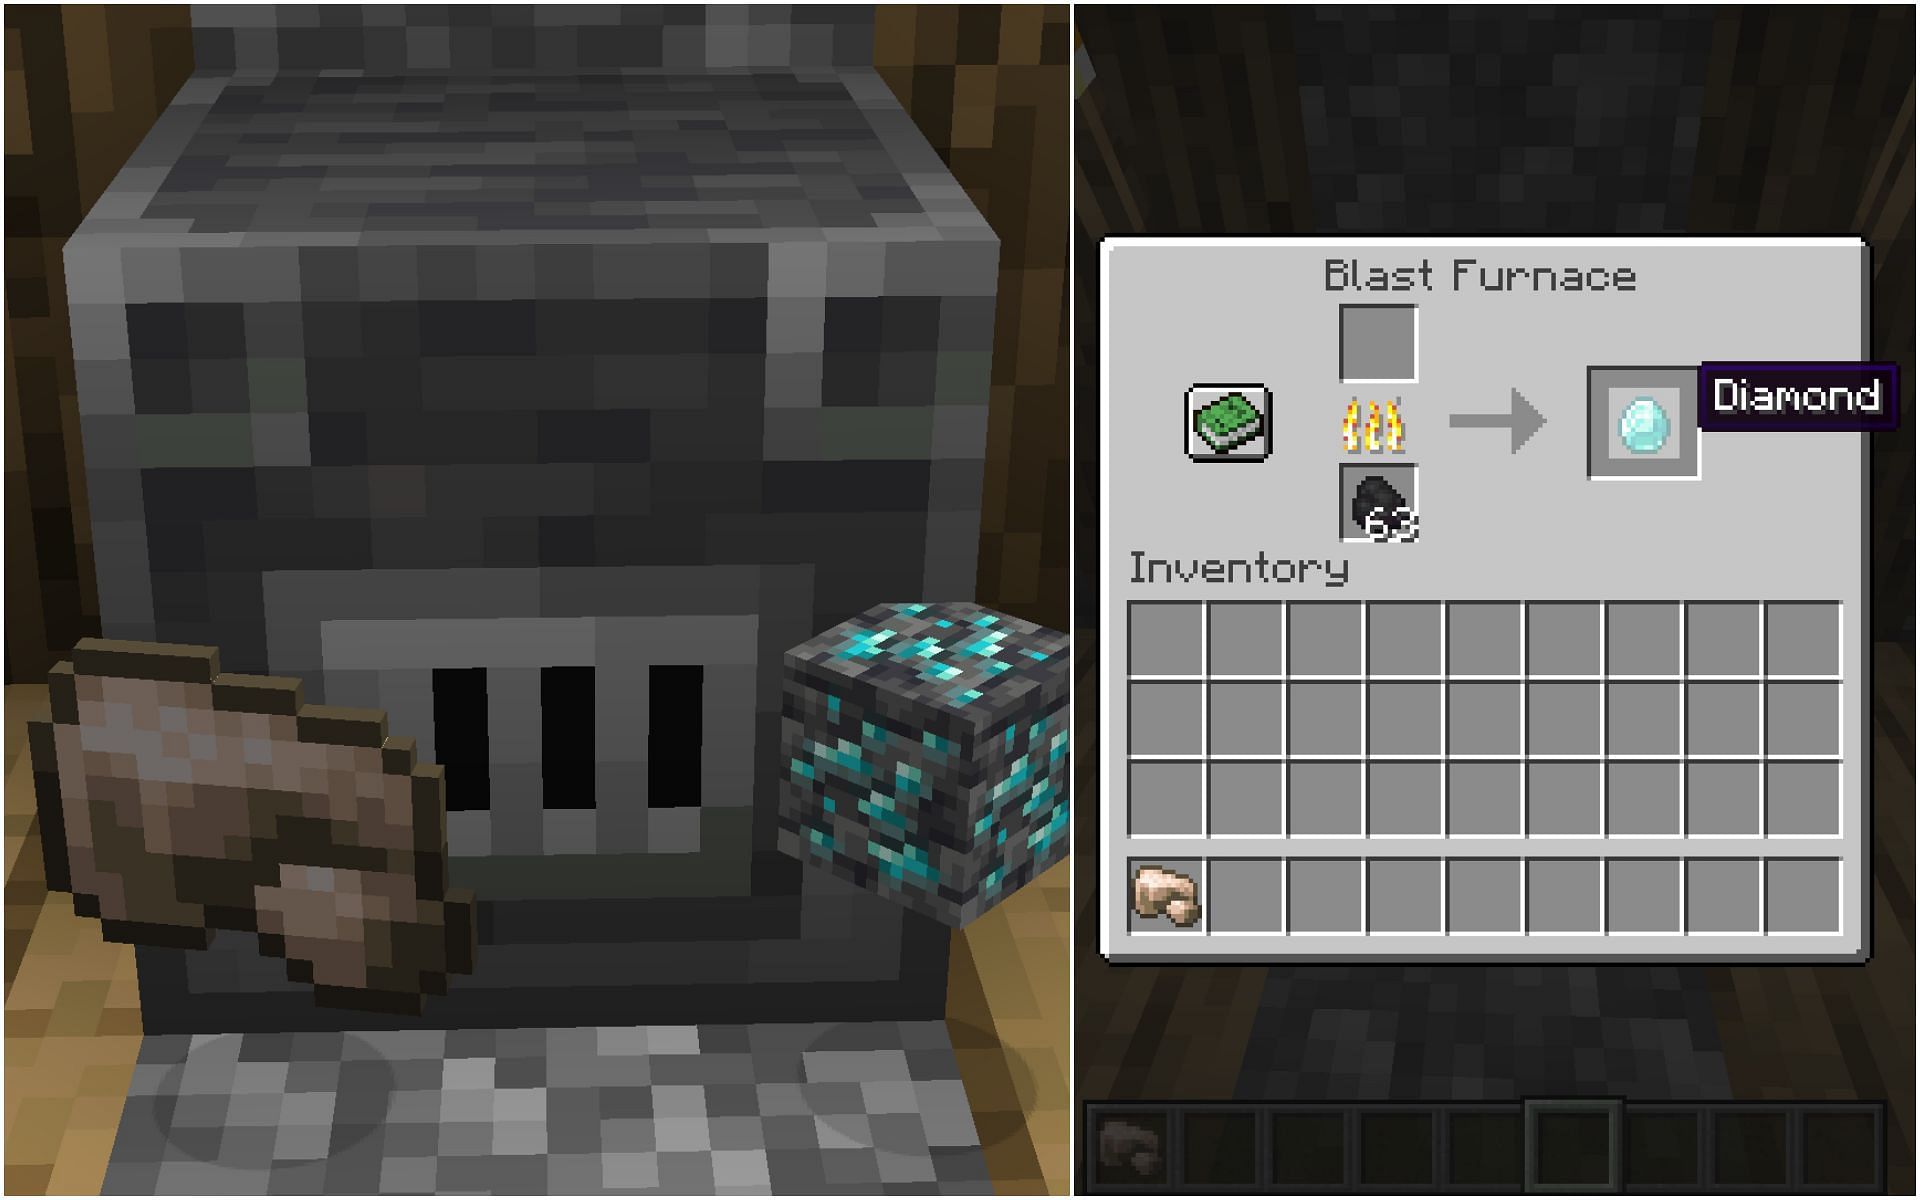 Blast furnace can be used to smelt raw earth materials at twice the speed (Image via Minecraft 1.19 update)